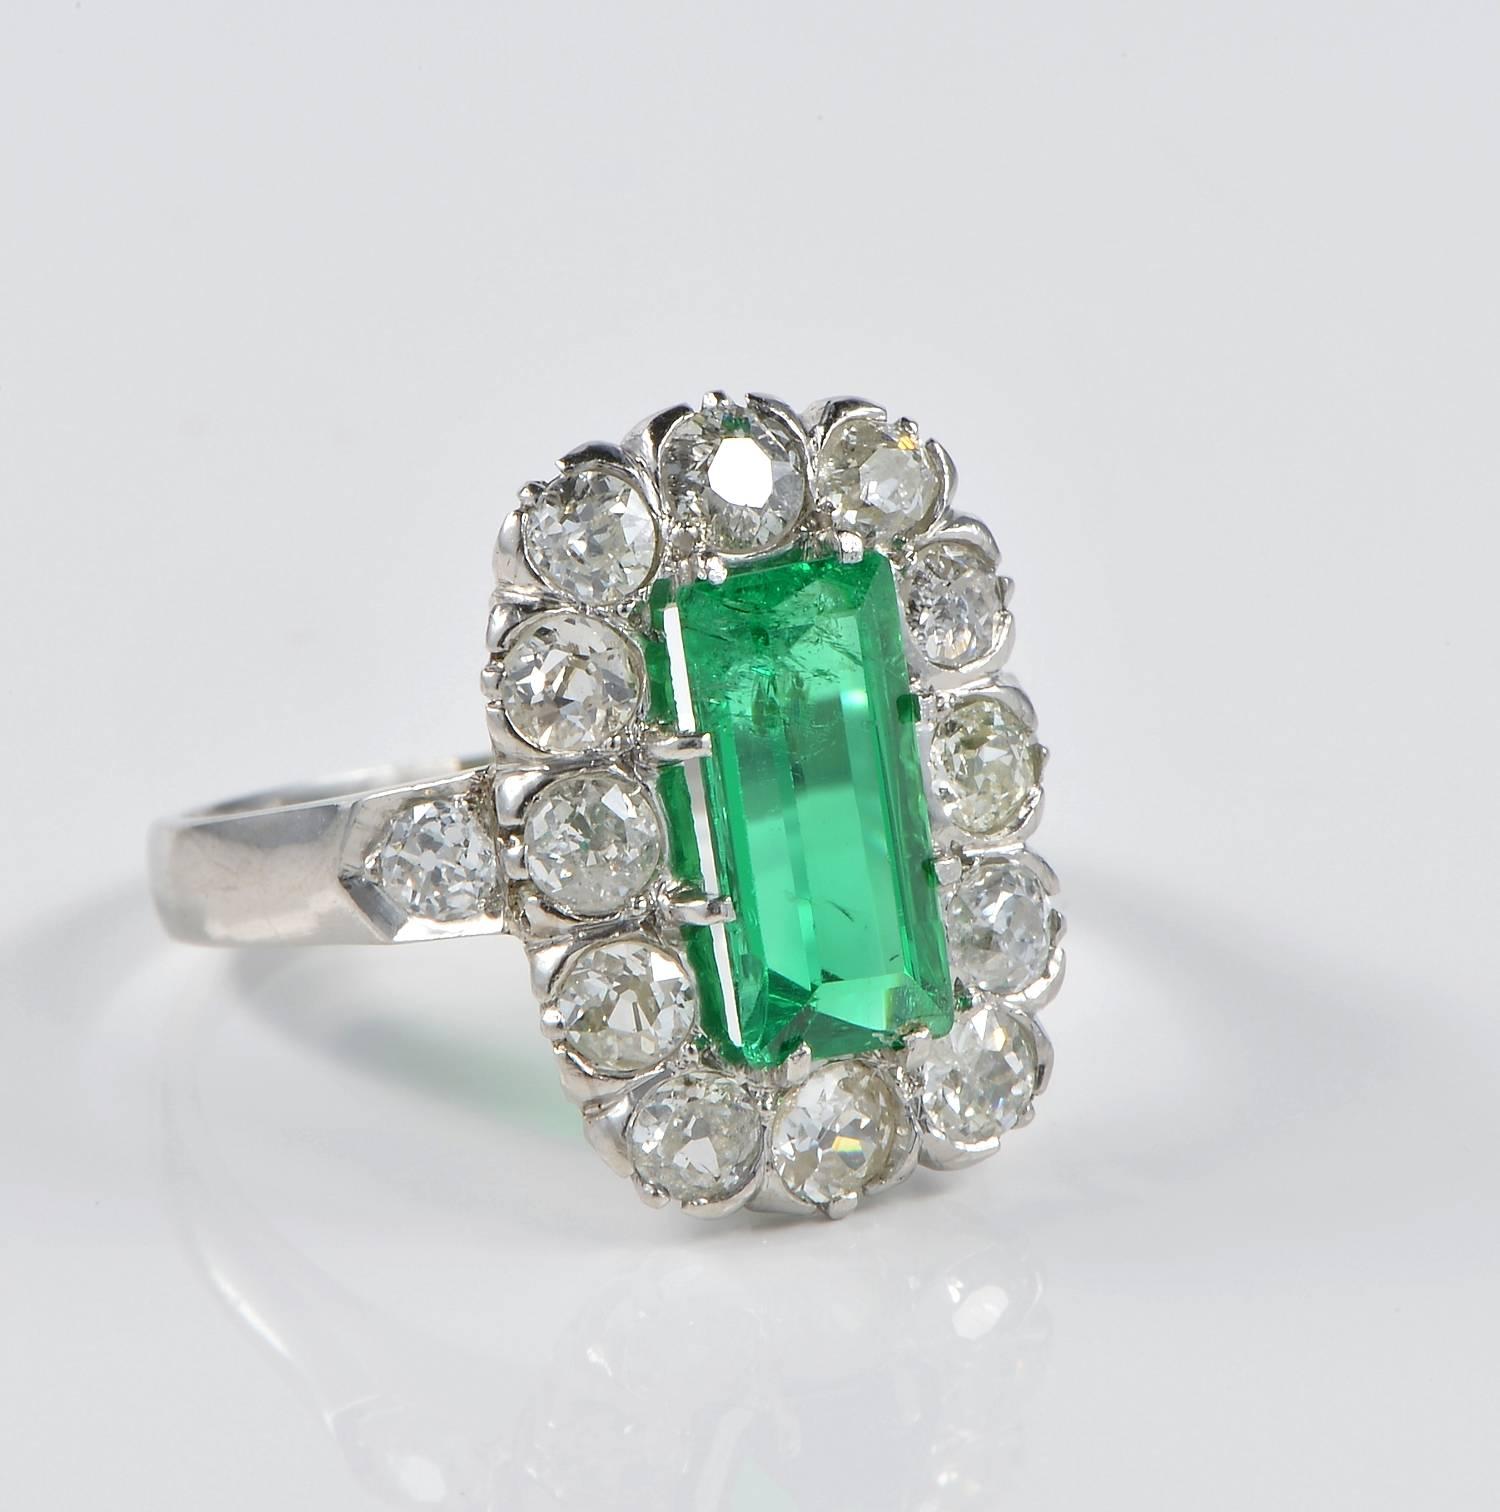 True fantastic authentic Art Deco ring dating 1925 ca – sheer luxury from start to finish!
The finest craftsmanship of the era made from solid PLATINUM – tested and guaranteed
Boasting an excellent Natural Colombian Emerald of the most luxurious